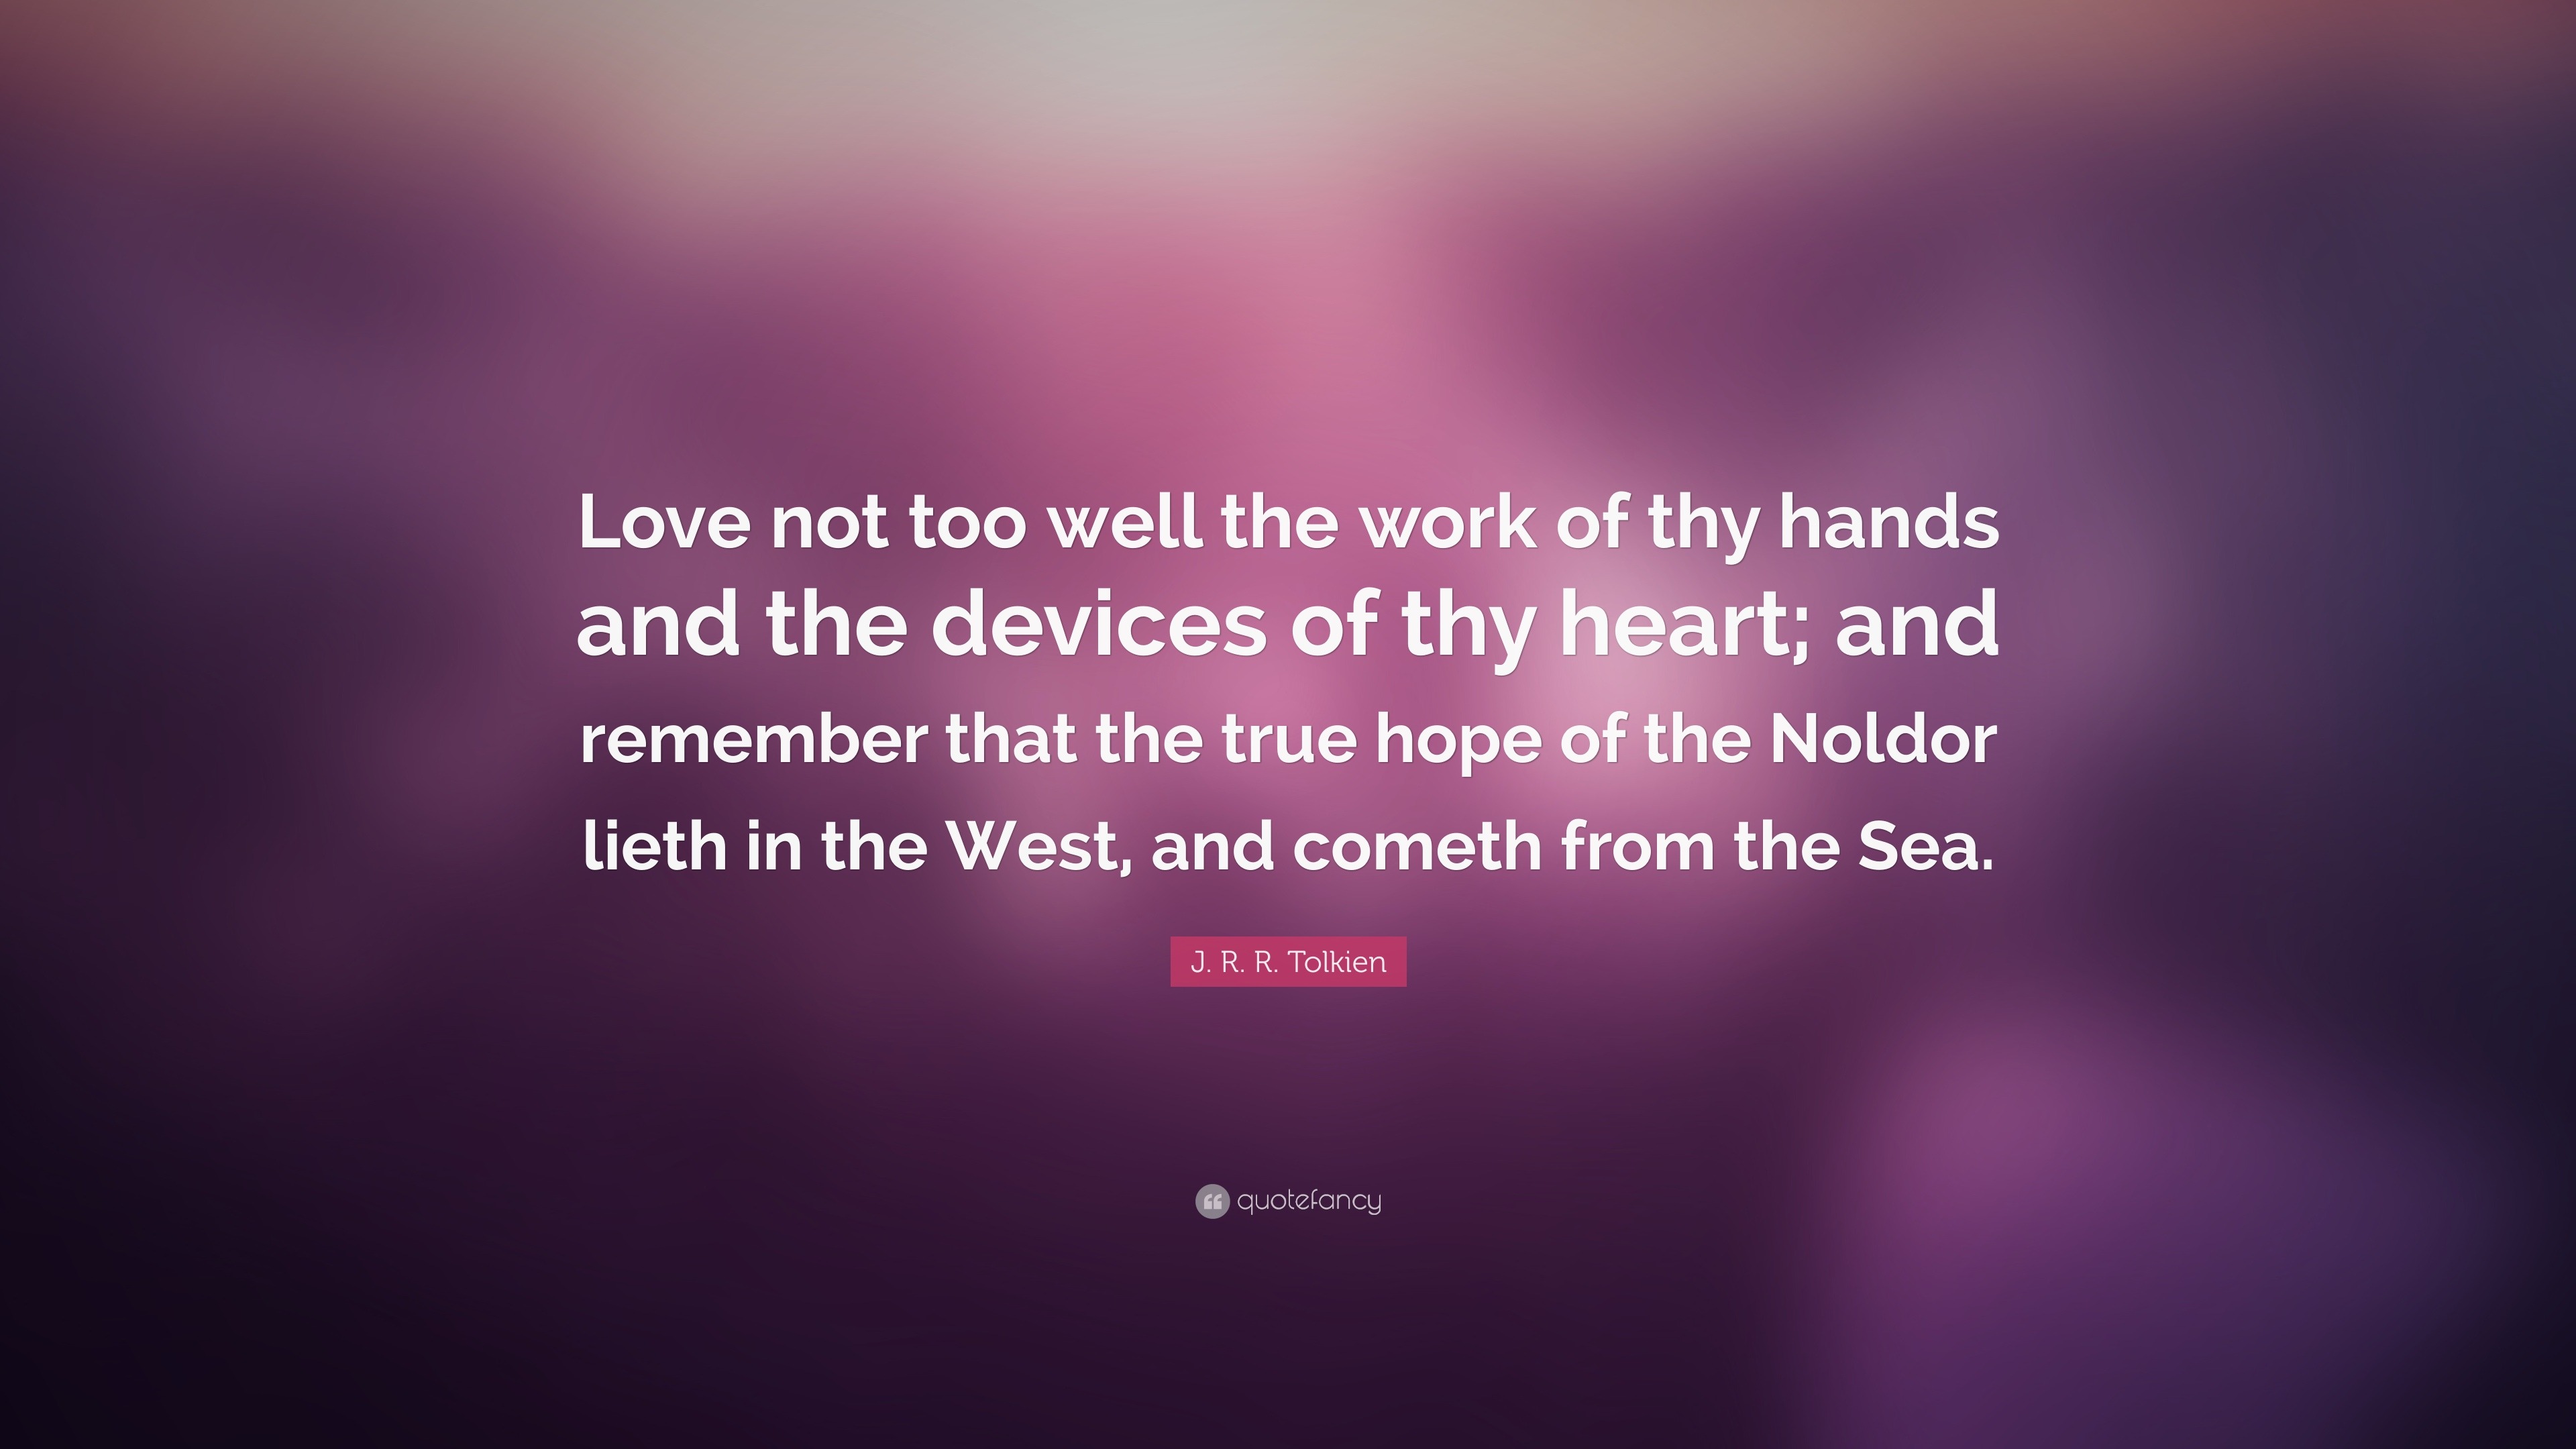 J. R. R. Tolkien Quote “Love not too well the work of thy hands and